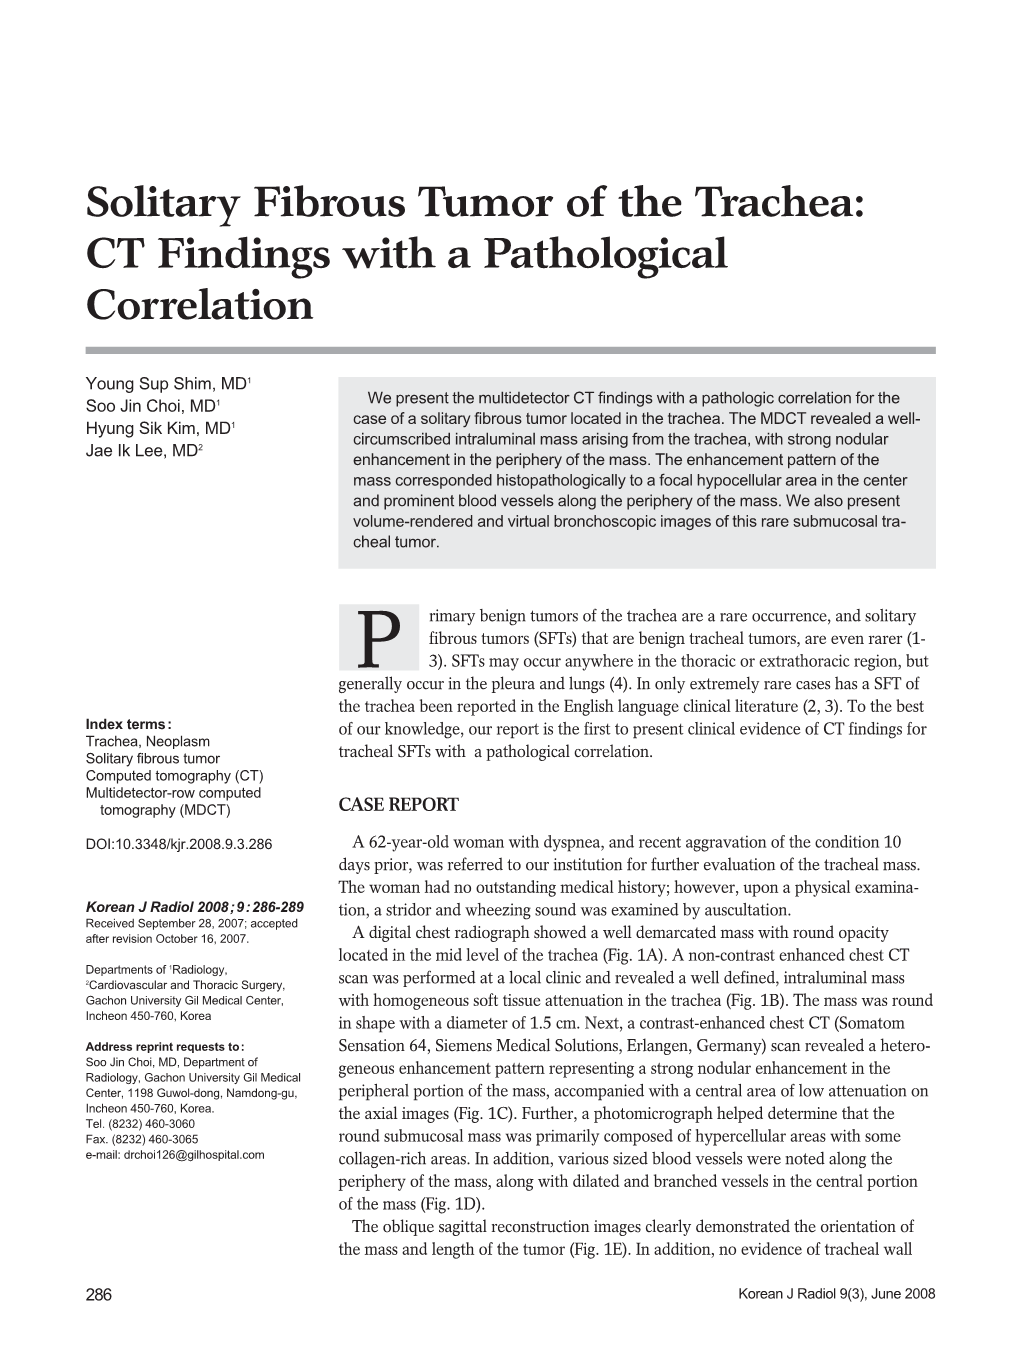 Solitary Fibrous Tumor of the Trachea: CT Findings with a Pathological Correlation